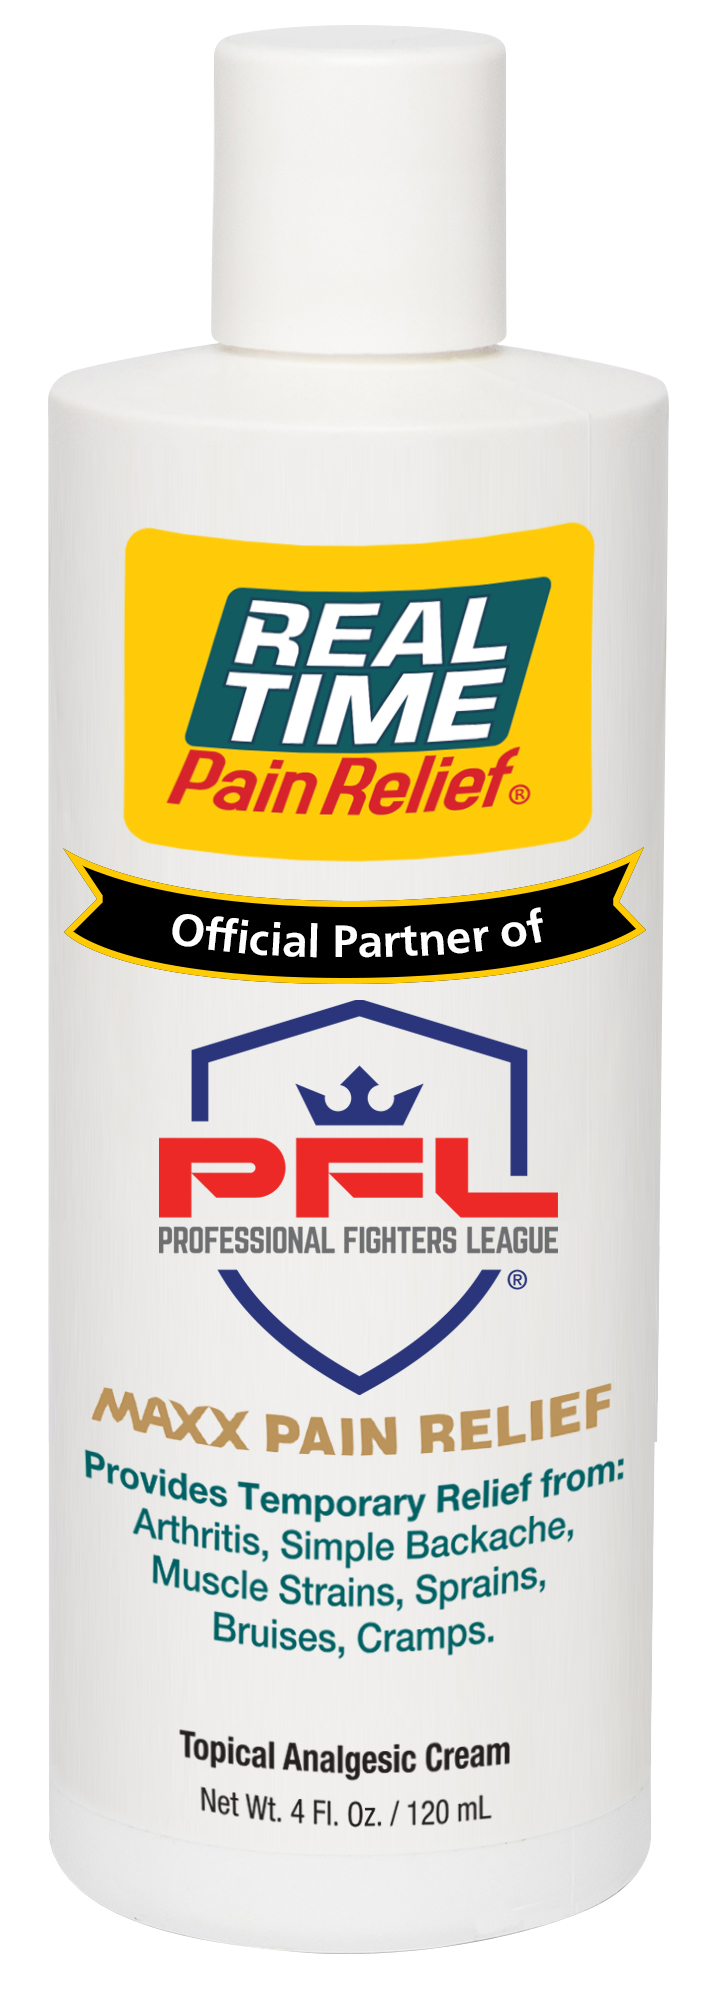 The Professional Fighters League logo will be featured on the front of a limited edition 4 oz bottle of RTPR’s MAXX Pain Relief Cream.